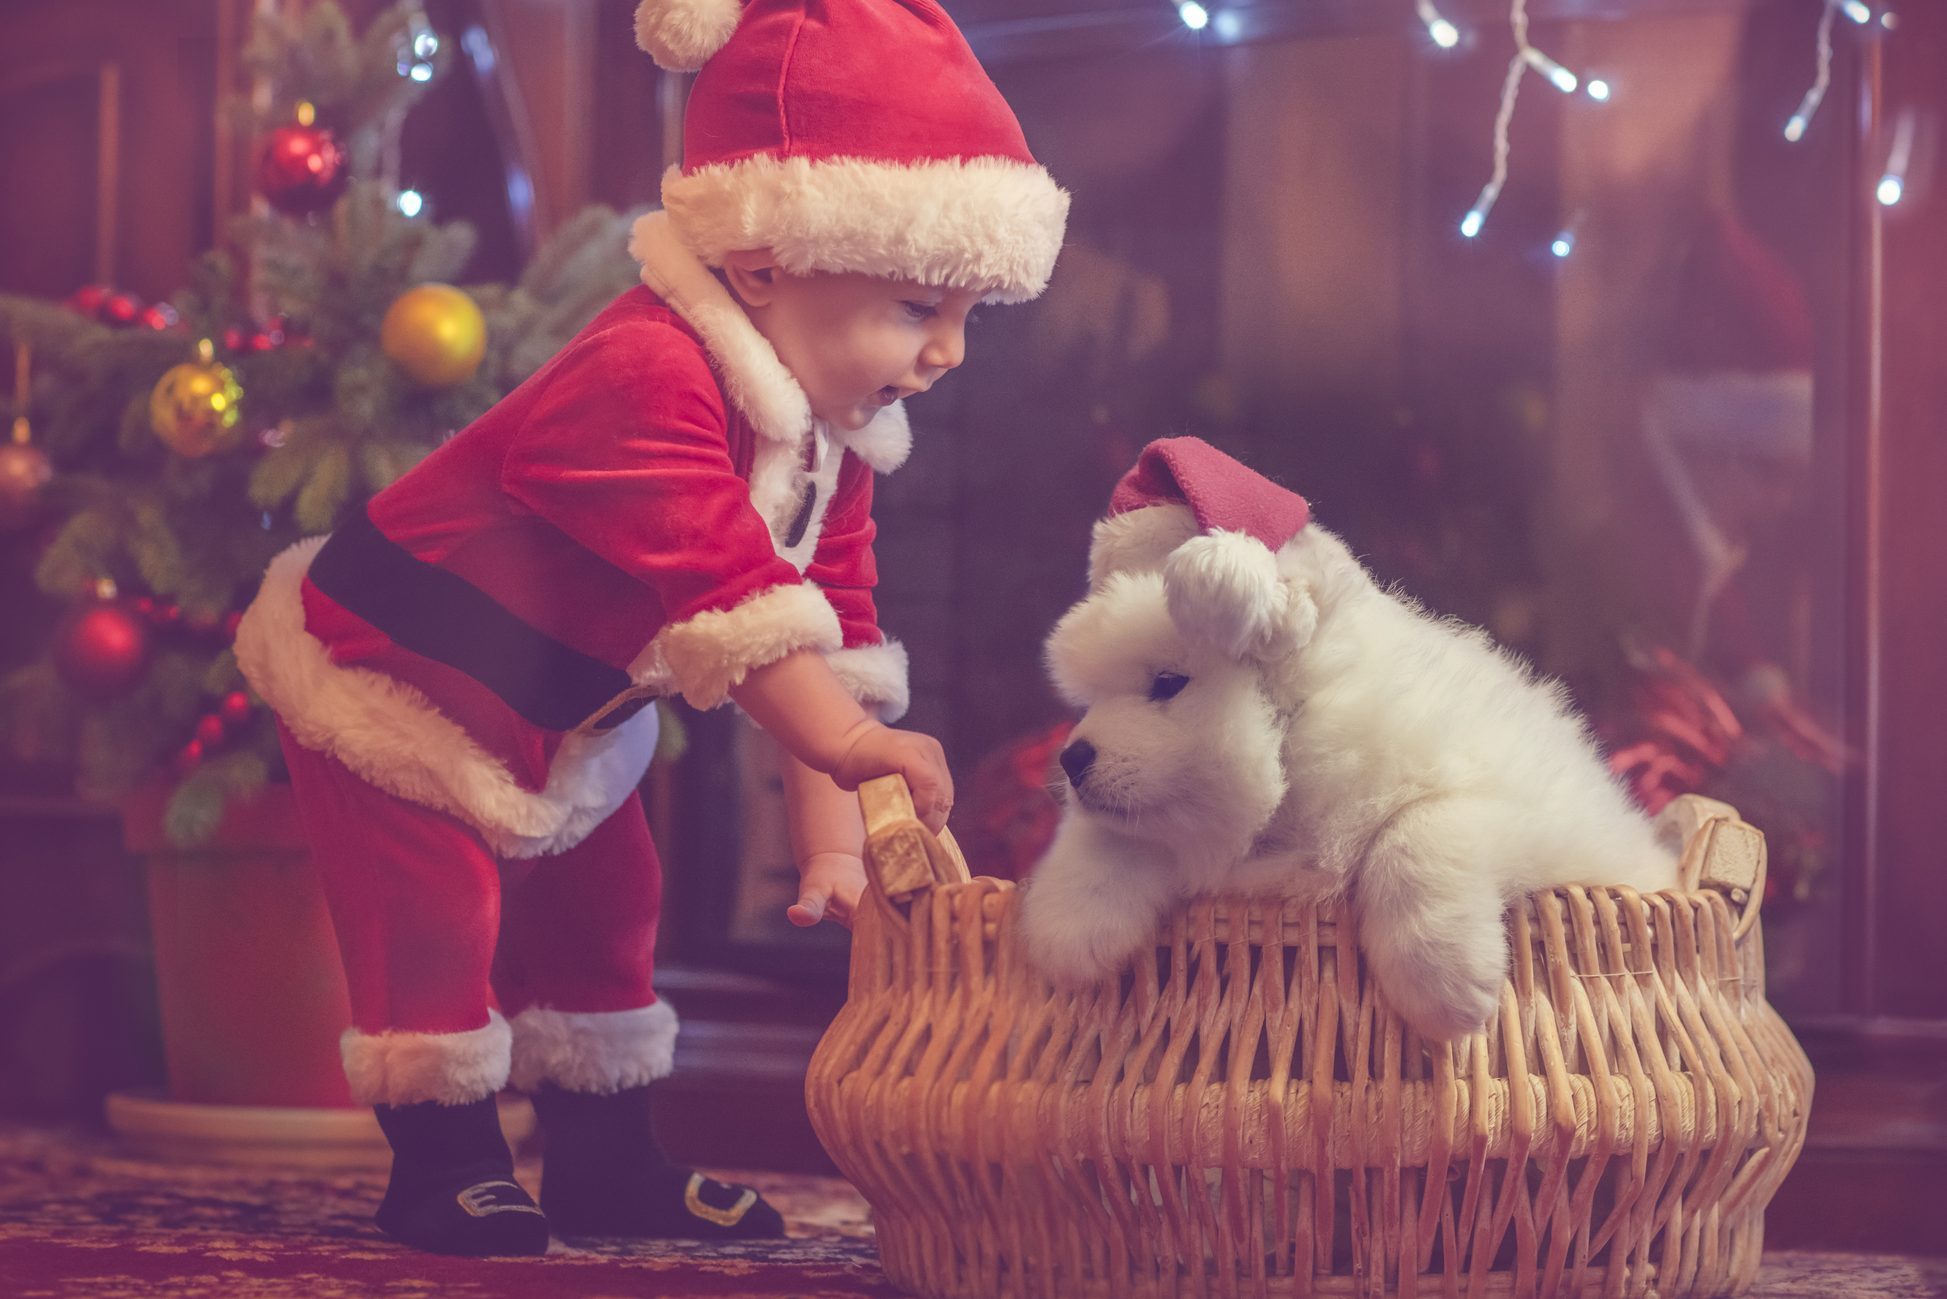 Cute baby boy dressed as santa with a samoyed puppy in a basket with Christmas decor all around